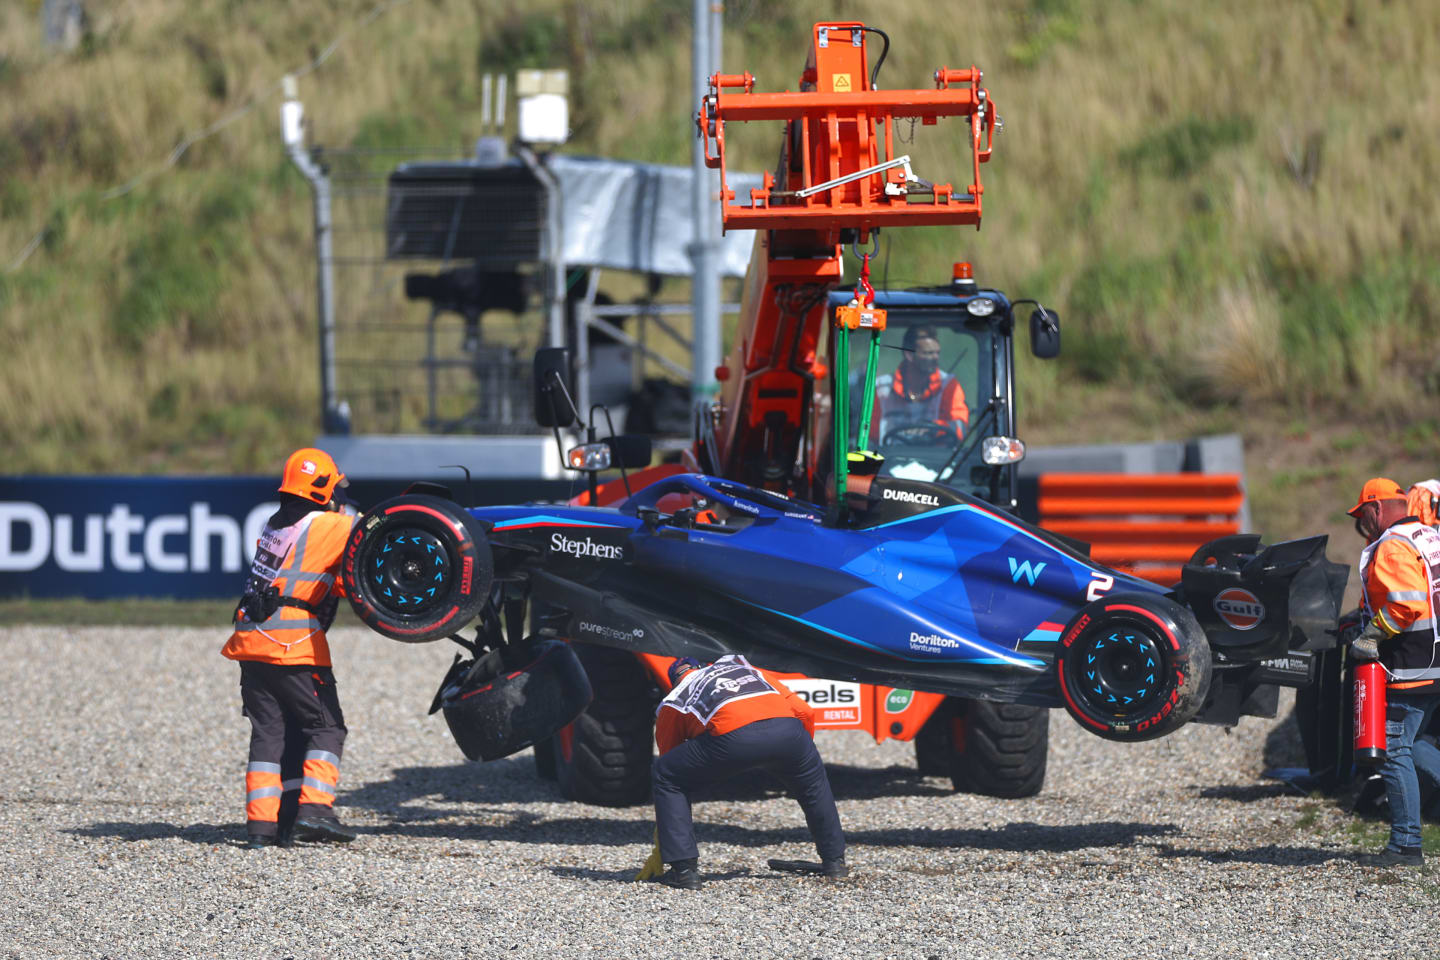 ZANDVOORT, NETHERLANDS - AUGUST 26: The car of Logan Sargeant of United States and Williams is removed from the track after he crashed during qualifying ahead of the F1 Grand Prix of The Netherlands at Circuit Zandvoort on August 26, 2023 in Zandvoort, Netherlands. (Photo by Peter Fox/Getty Images)